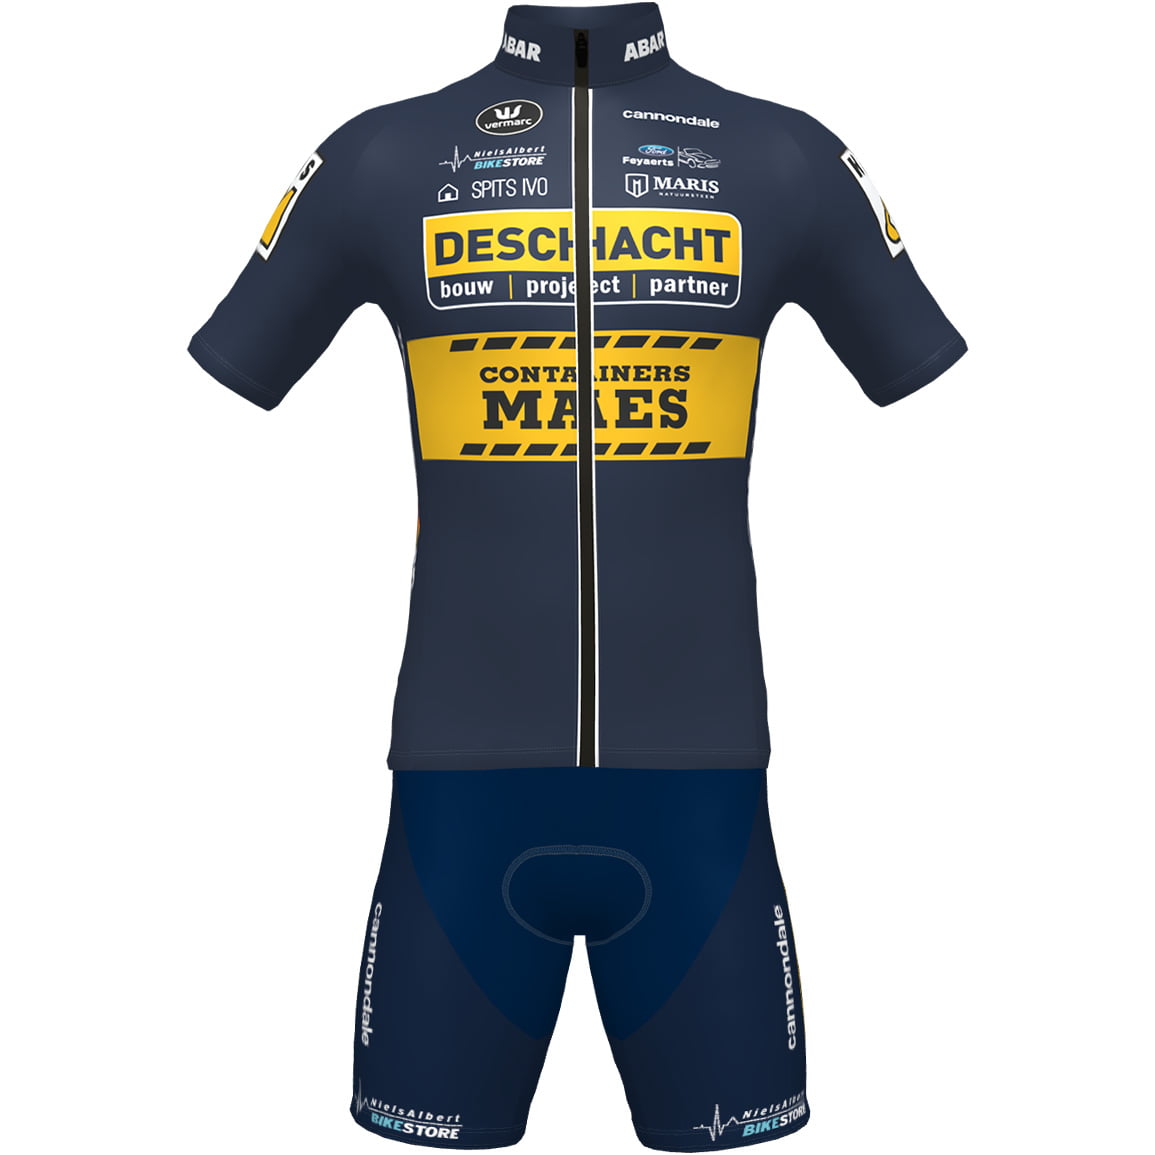 DESCHACHT - HENS - MEAS 2022 Set (cycling jersey + cycling shorts) Set (2 pieces), for men, Cycling clothing